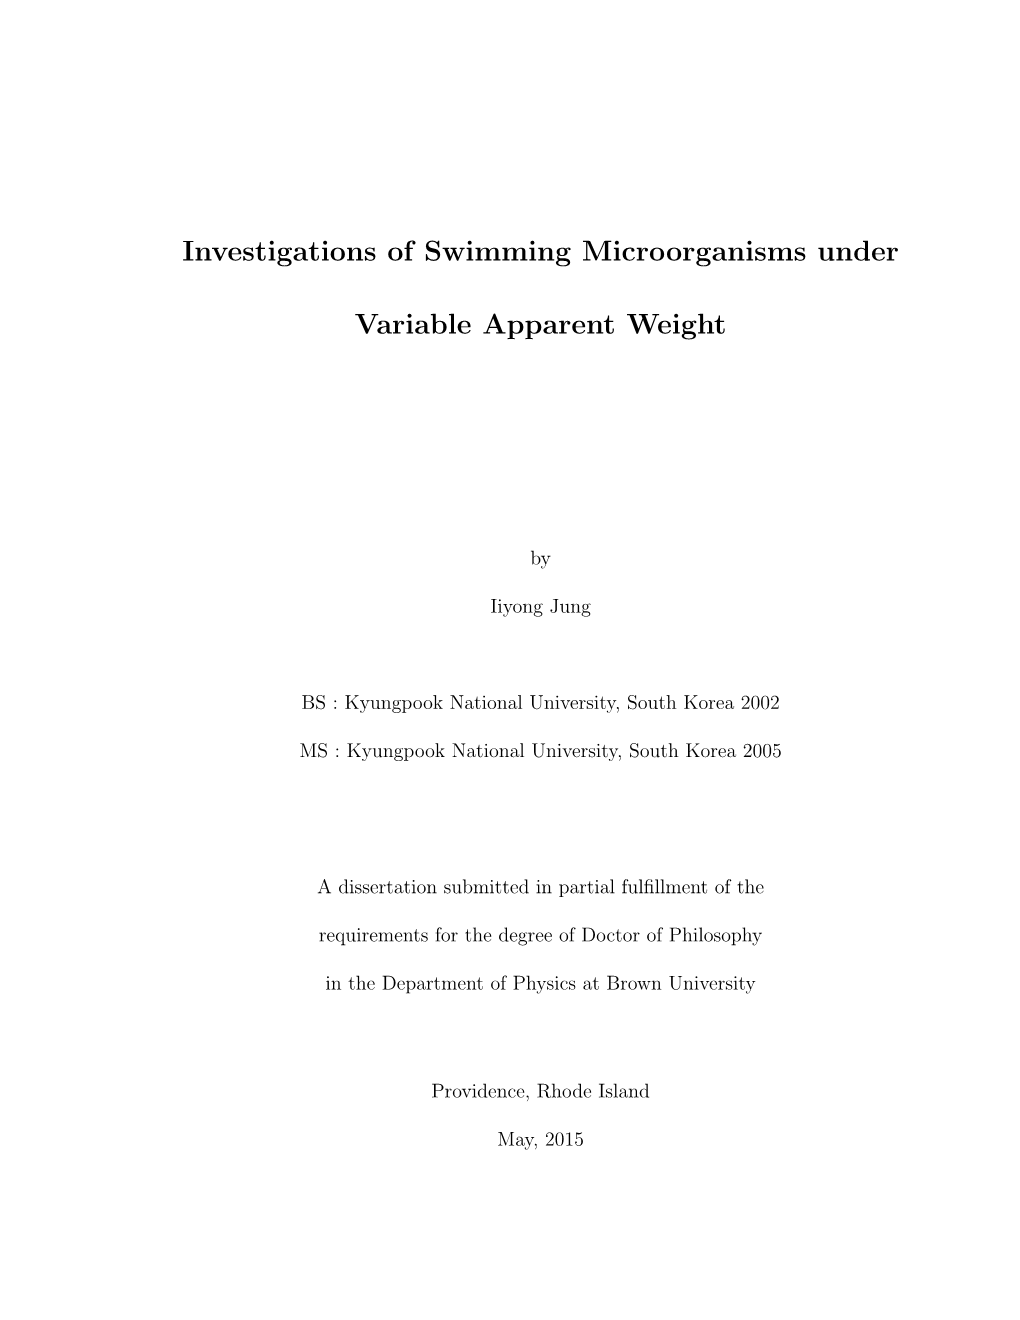 Investigations of Swimming Microorganisms Under Variable Apparent Weight